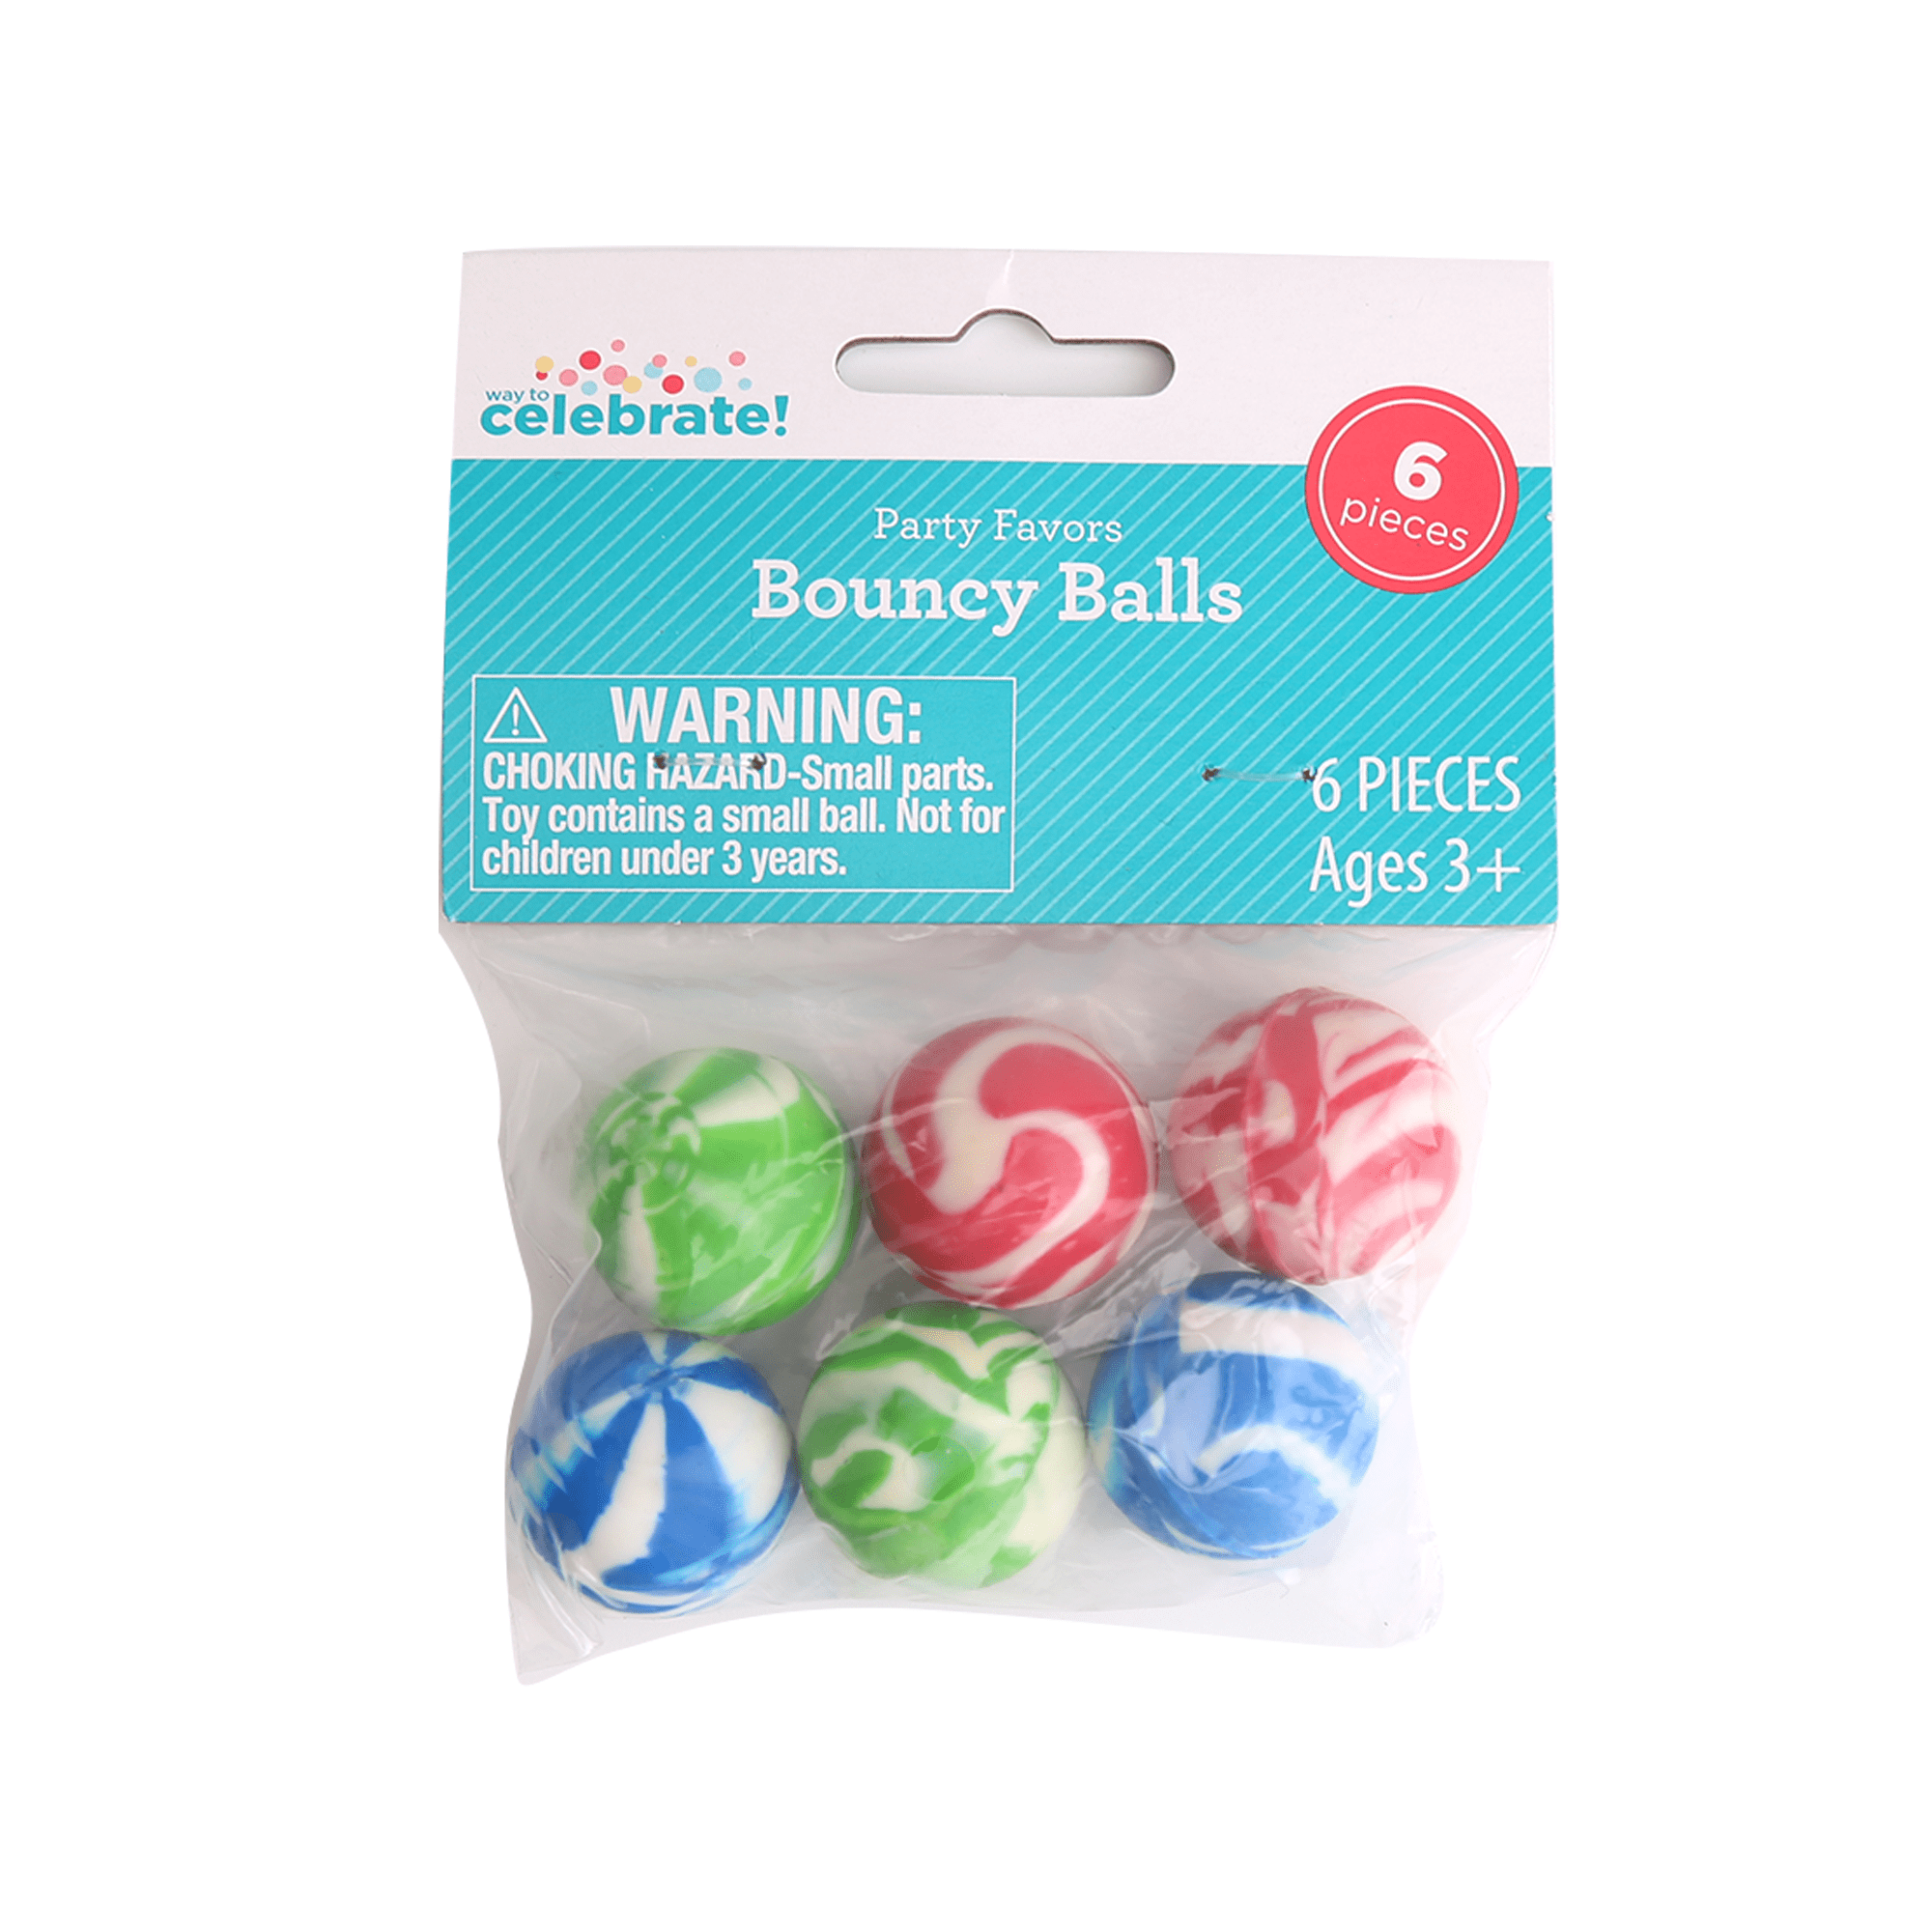 6 Marble Rubber Bouncy Balls, Multi Colors, Way to Celebrate! Party Favors,  Everyday, 6 Pieces 